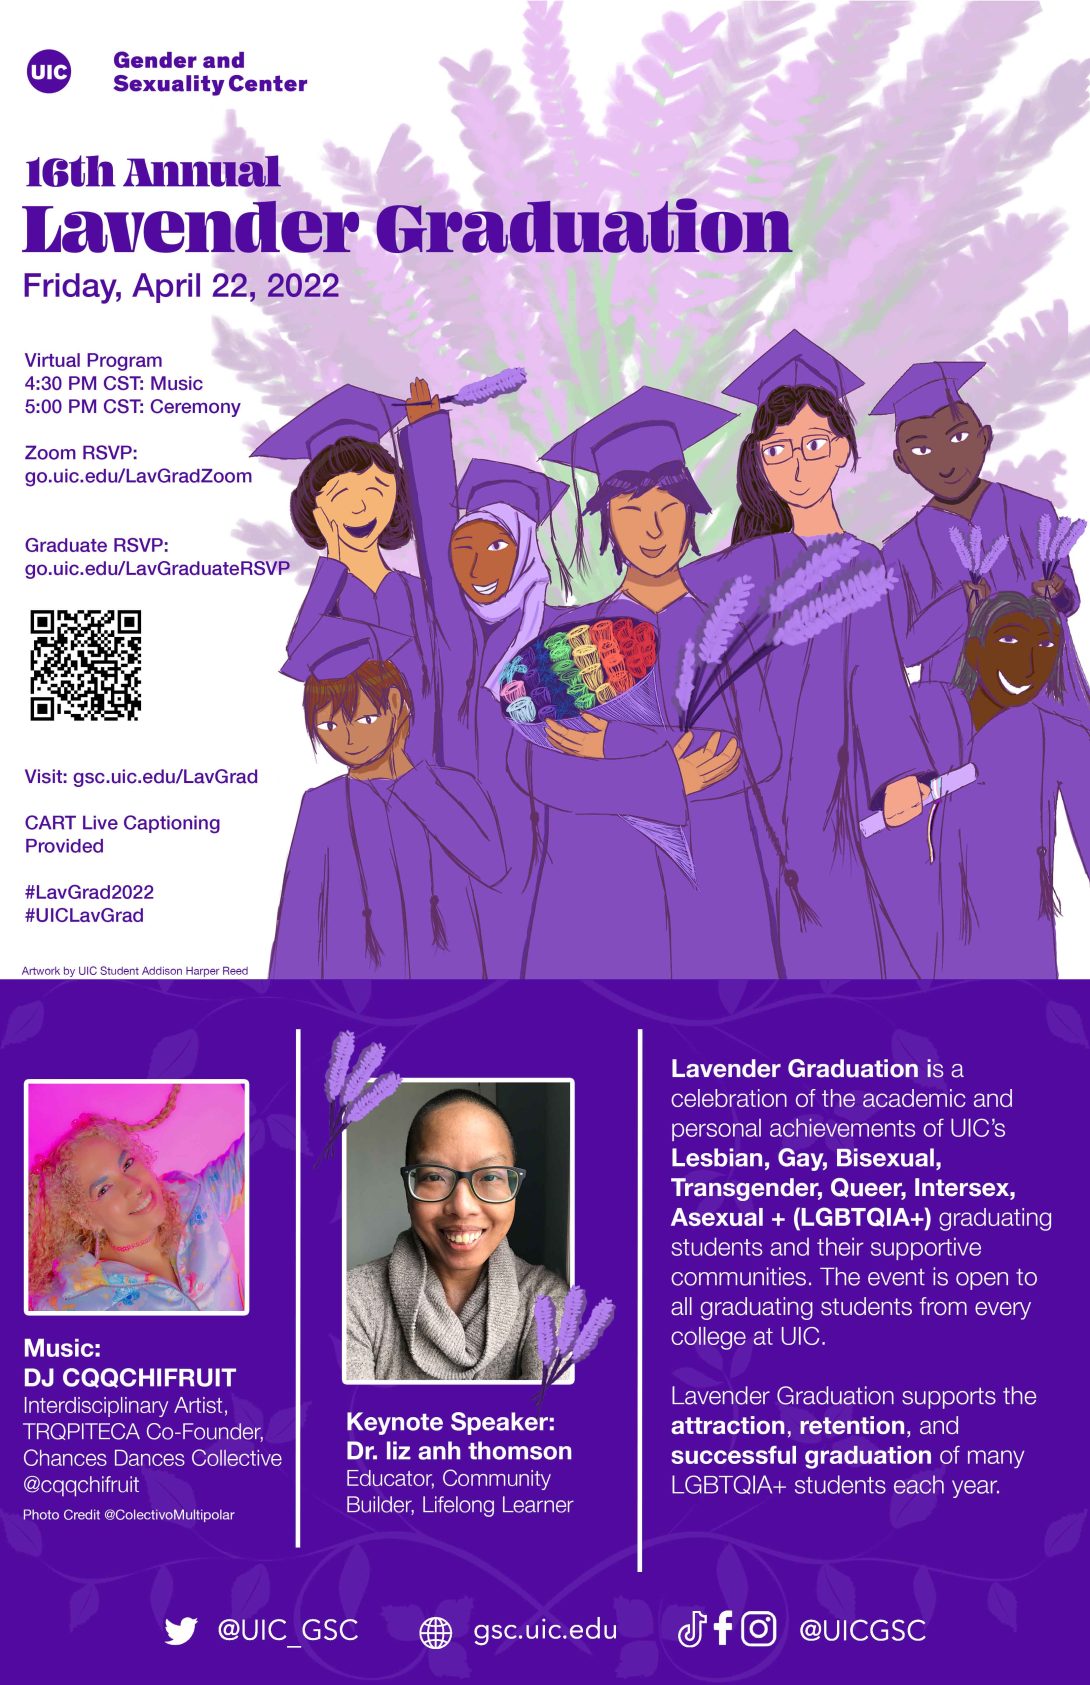 First half of poster has a lavender bouquet in the background. GSC logo is on top, centered followed by “16th Annual Lavender Graduation” with event info: “Friday, April 22, 2022.” In front of the bouquet is a group of graduating students of diverse backgrounds. The person in the center is holding a rainbow bouquet and lavender stems. Bottom reads “Artwork by UIC student Addison Harper Reed.” Second half has a solid purple background with the first image from left to right: DJ  DJ CQQCHIFRUIT with curly blonde braids and smiling. Next to the DJ is an image of keynote speaker Dr. liz anh thomson, a dark-skinned Vietnamese person, indoors smiling with shaved black hair, black eyes, and charcoal thick rimmed glasses; wearing a lightweight beige turtleneck sweater. Text describing Lav Grad is next to Liz. Bottom of the poster has social media icons with handles.